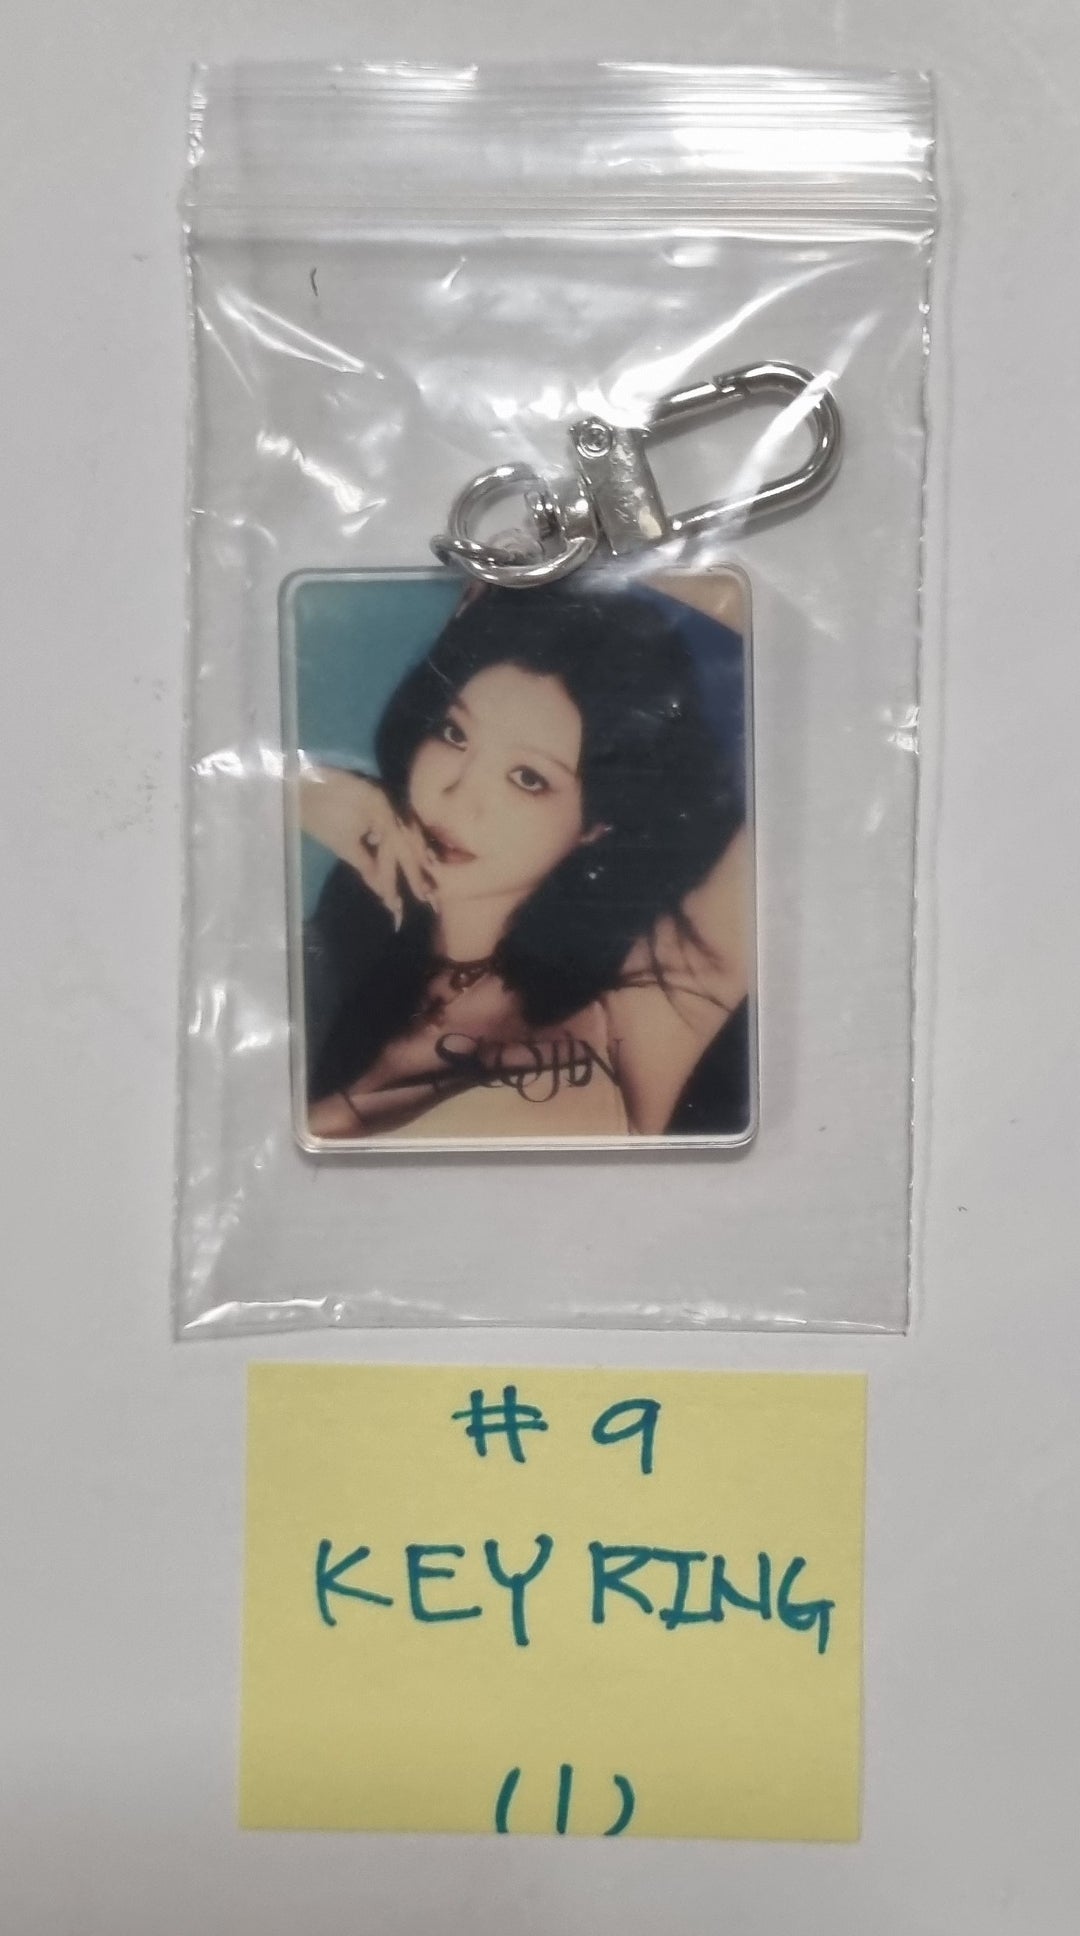 SOOJIN "RIZZ" - Everline Pop-Up Store Official MD [Top Loader, Hand Mirror, Sticker Pack, Metal Keyring, Photo Pack, Collect Book]  [24.5.23]